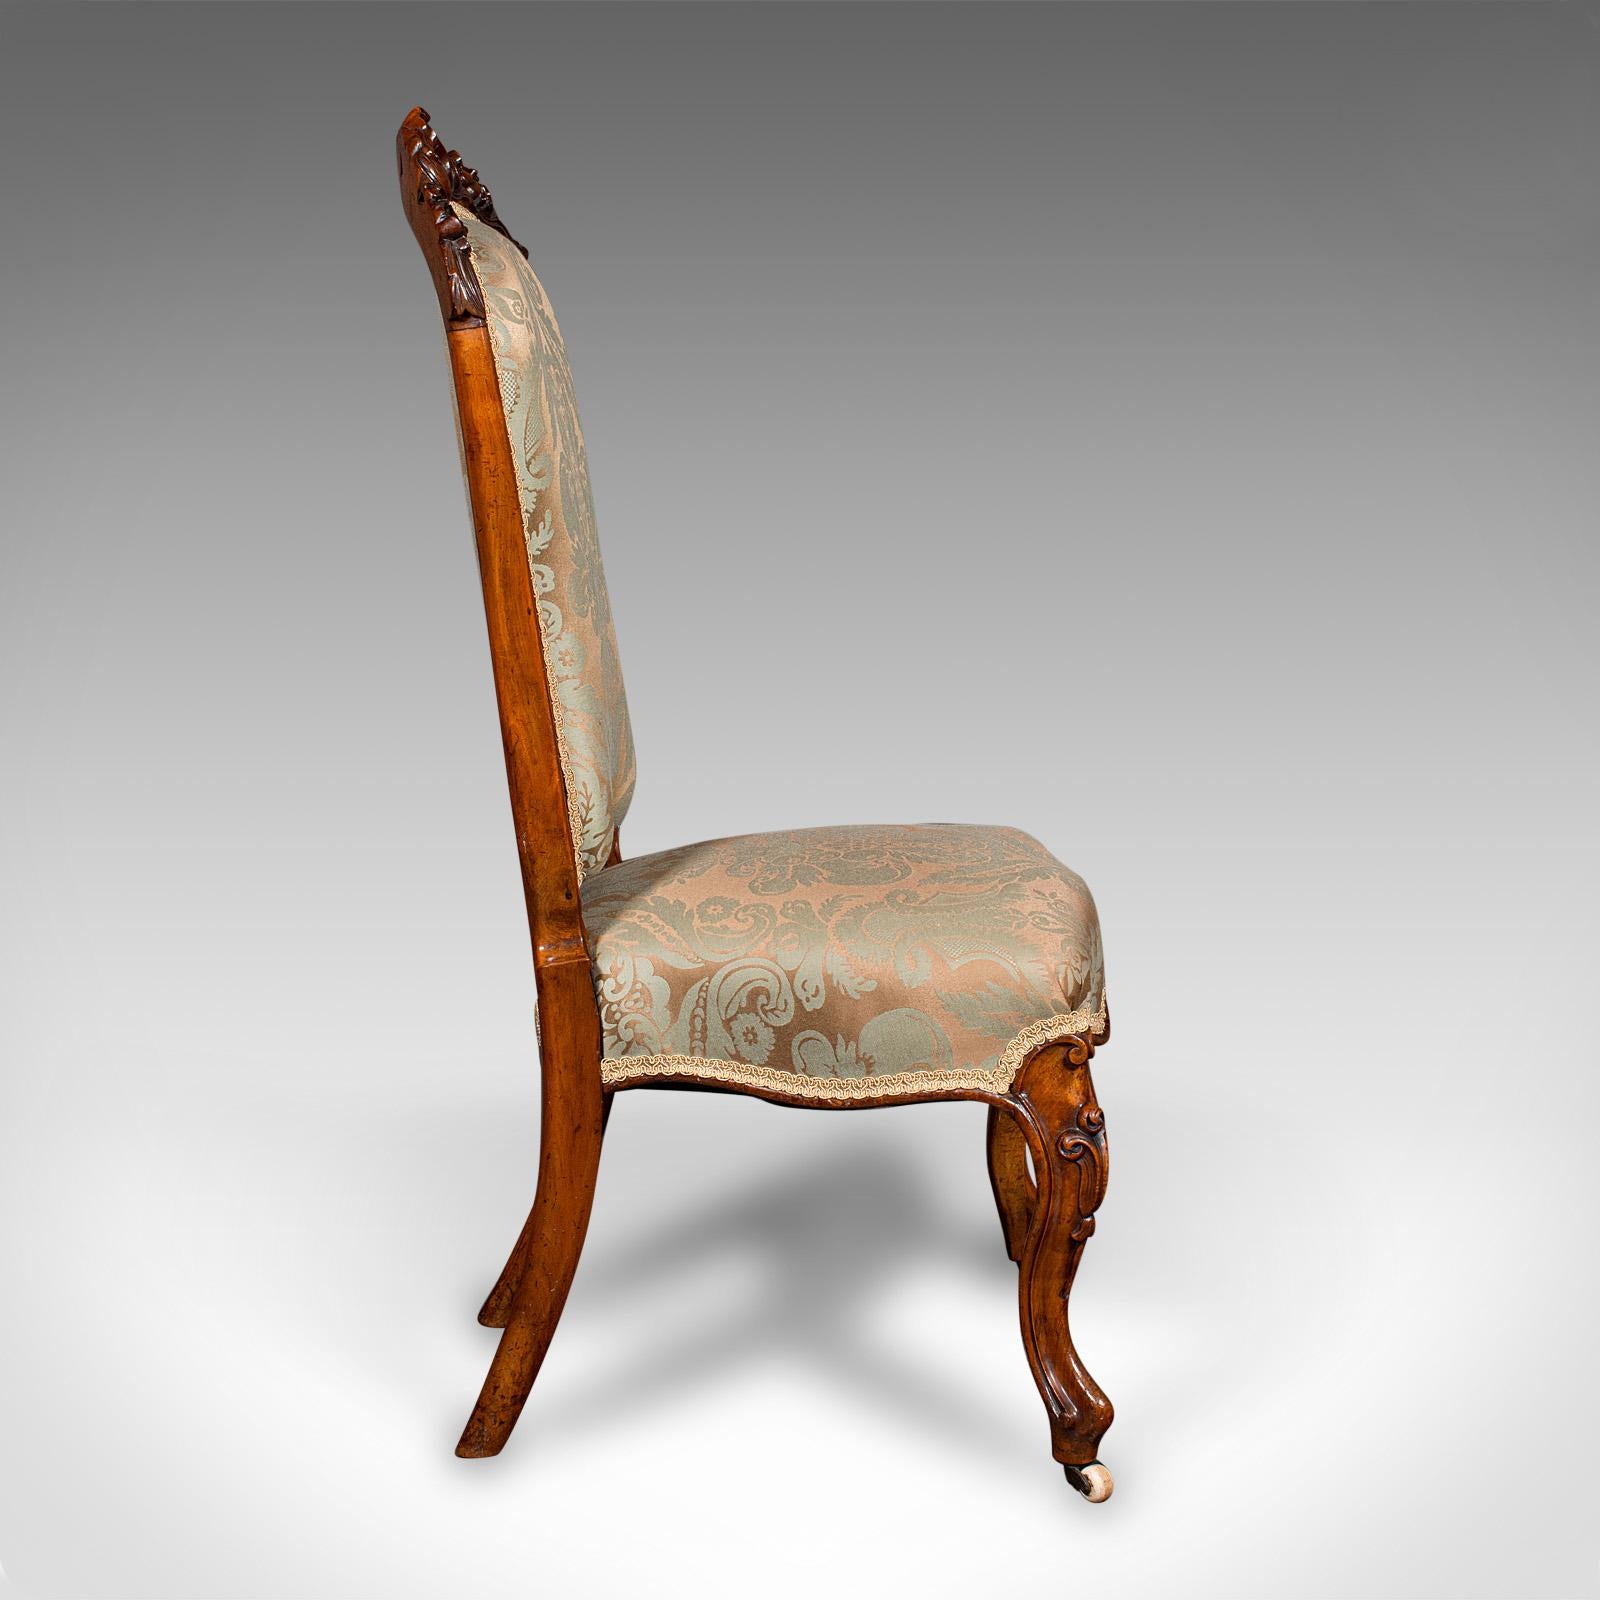 Britannique Antique The Drawing Room Chair, English, Walnut, Ladies, Side Seat, Early Victorian en vente